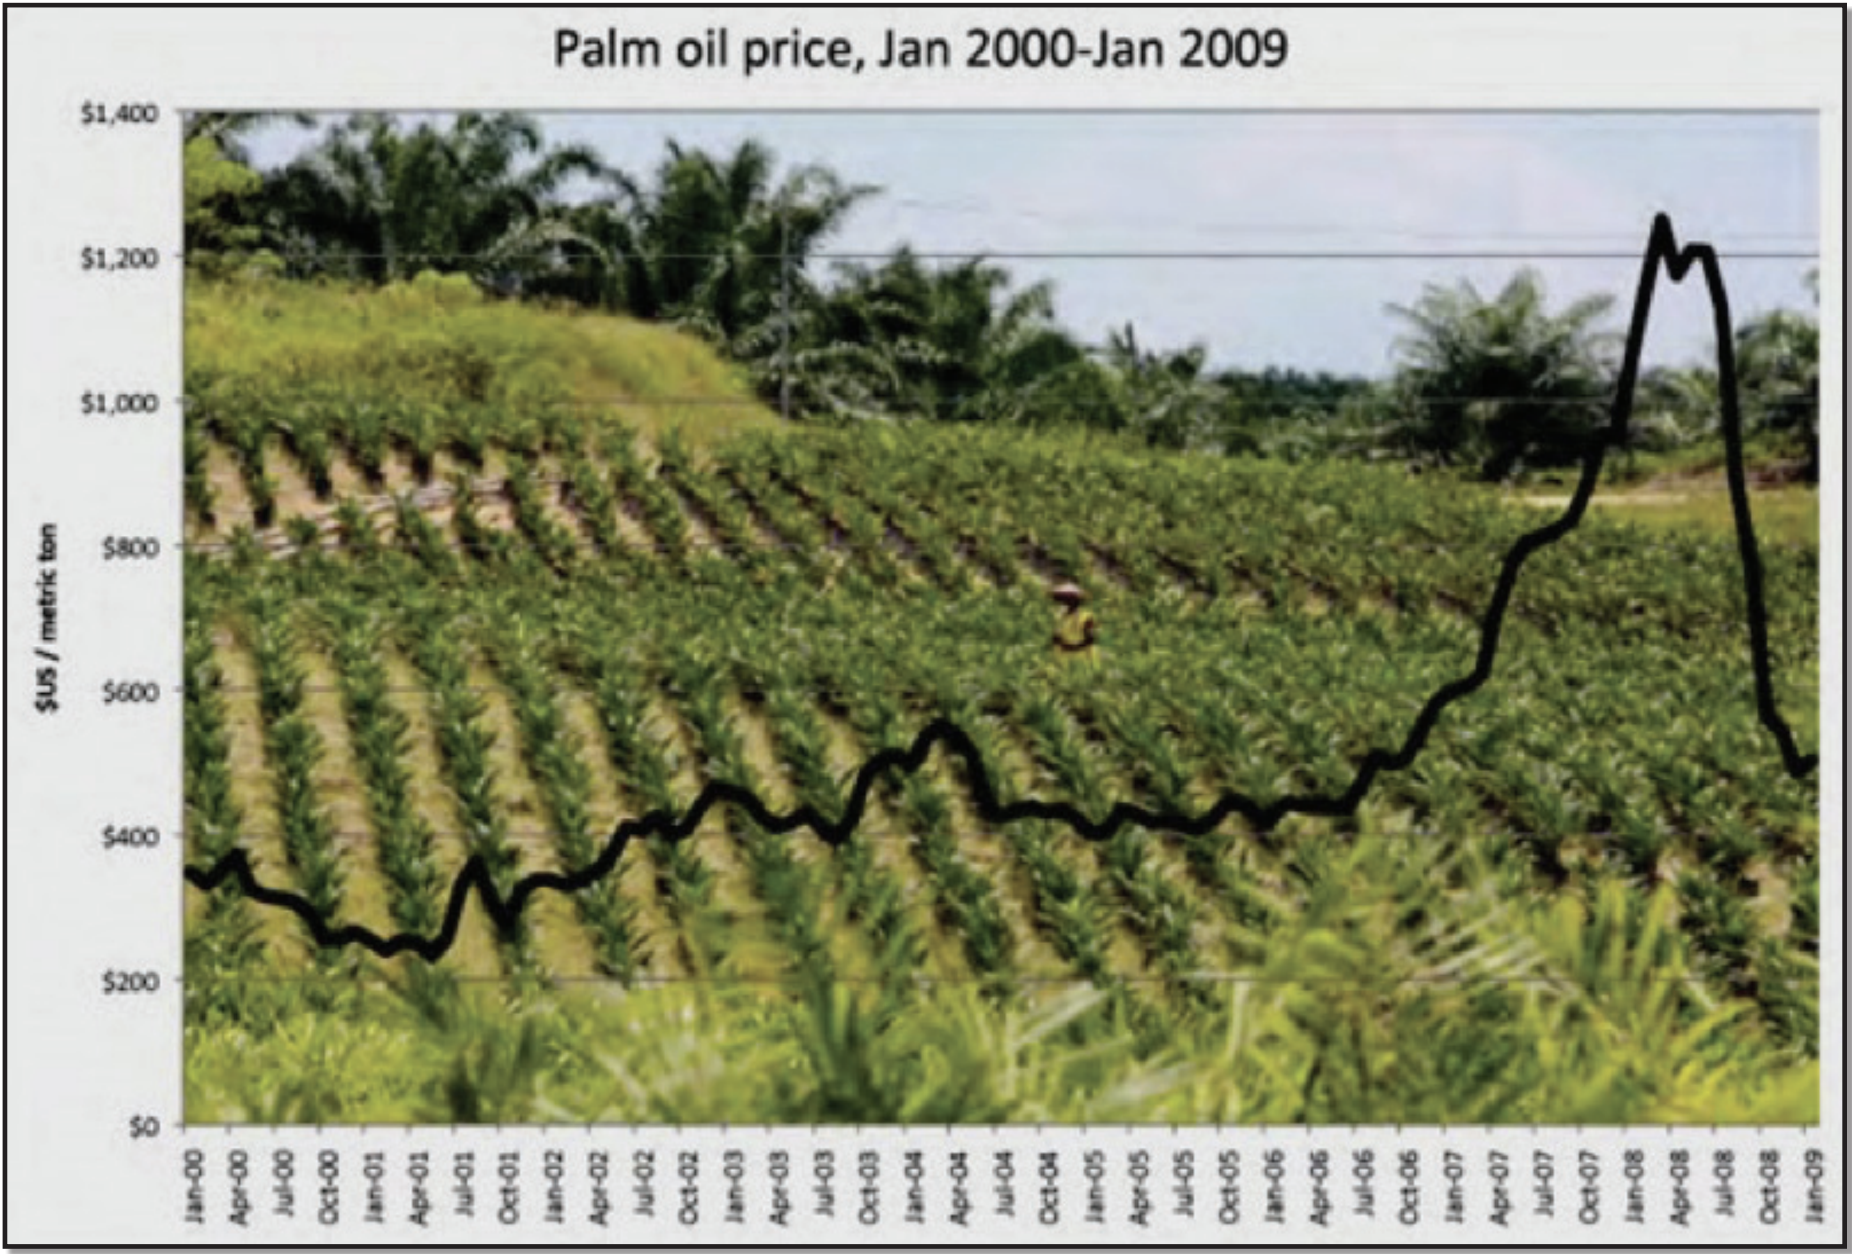 Palm Oil Prices from 2000 to 2009, by month(x axis), in us dollars per metric ton (y axis)